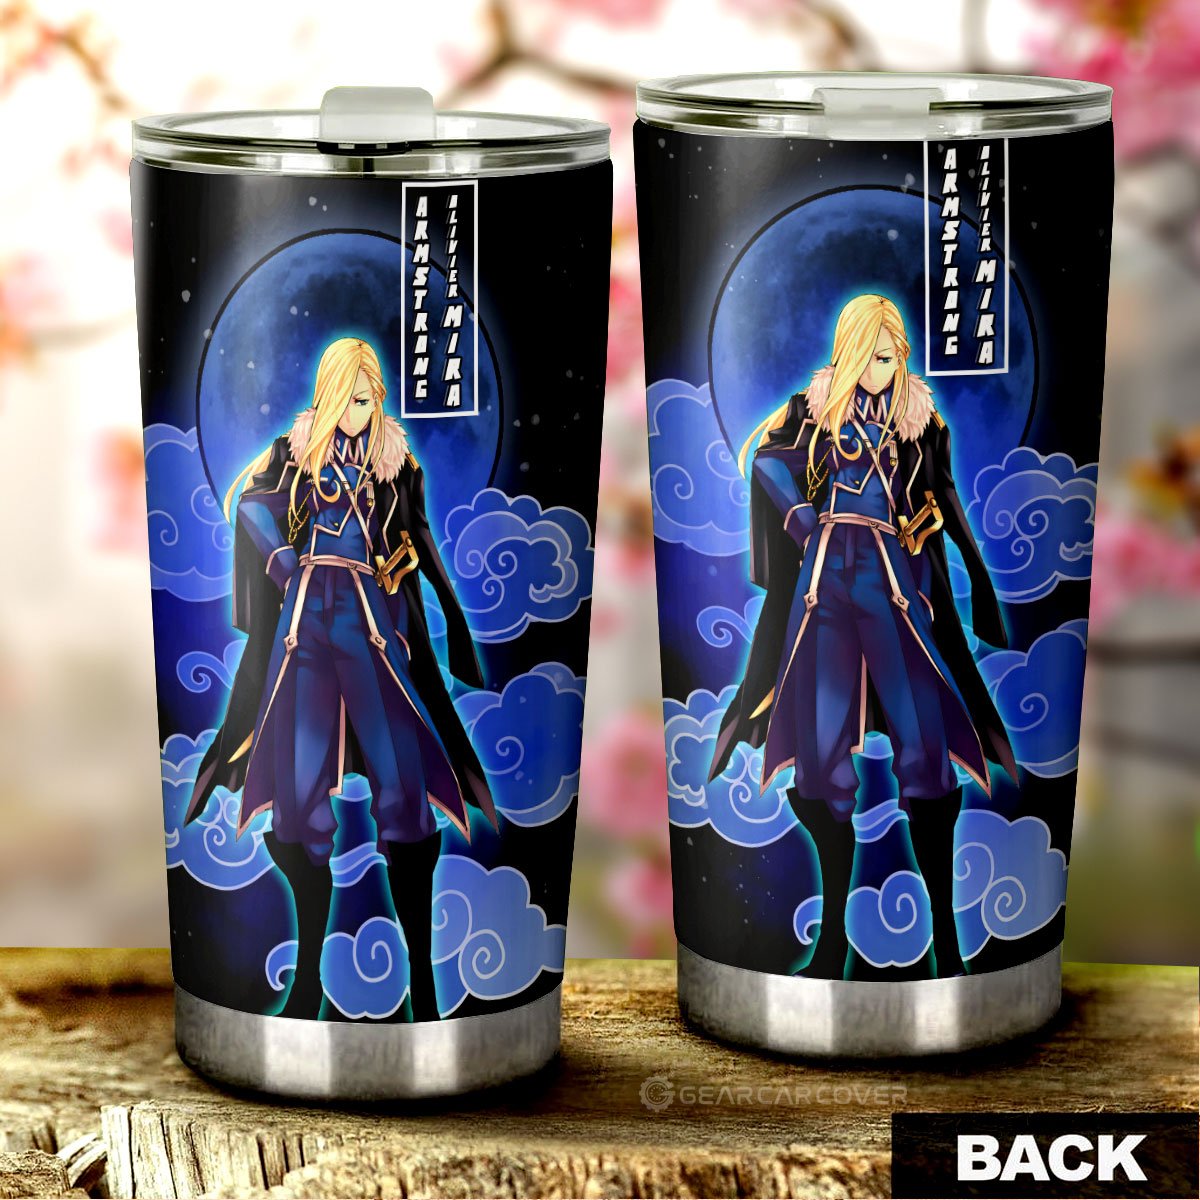 Olivier Mira Armstrong Tumbler Cup Custom Car Interior Accessories - Gearcarcover - 3